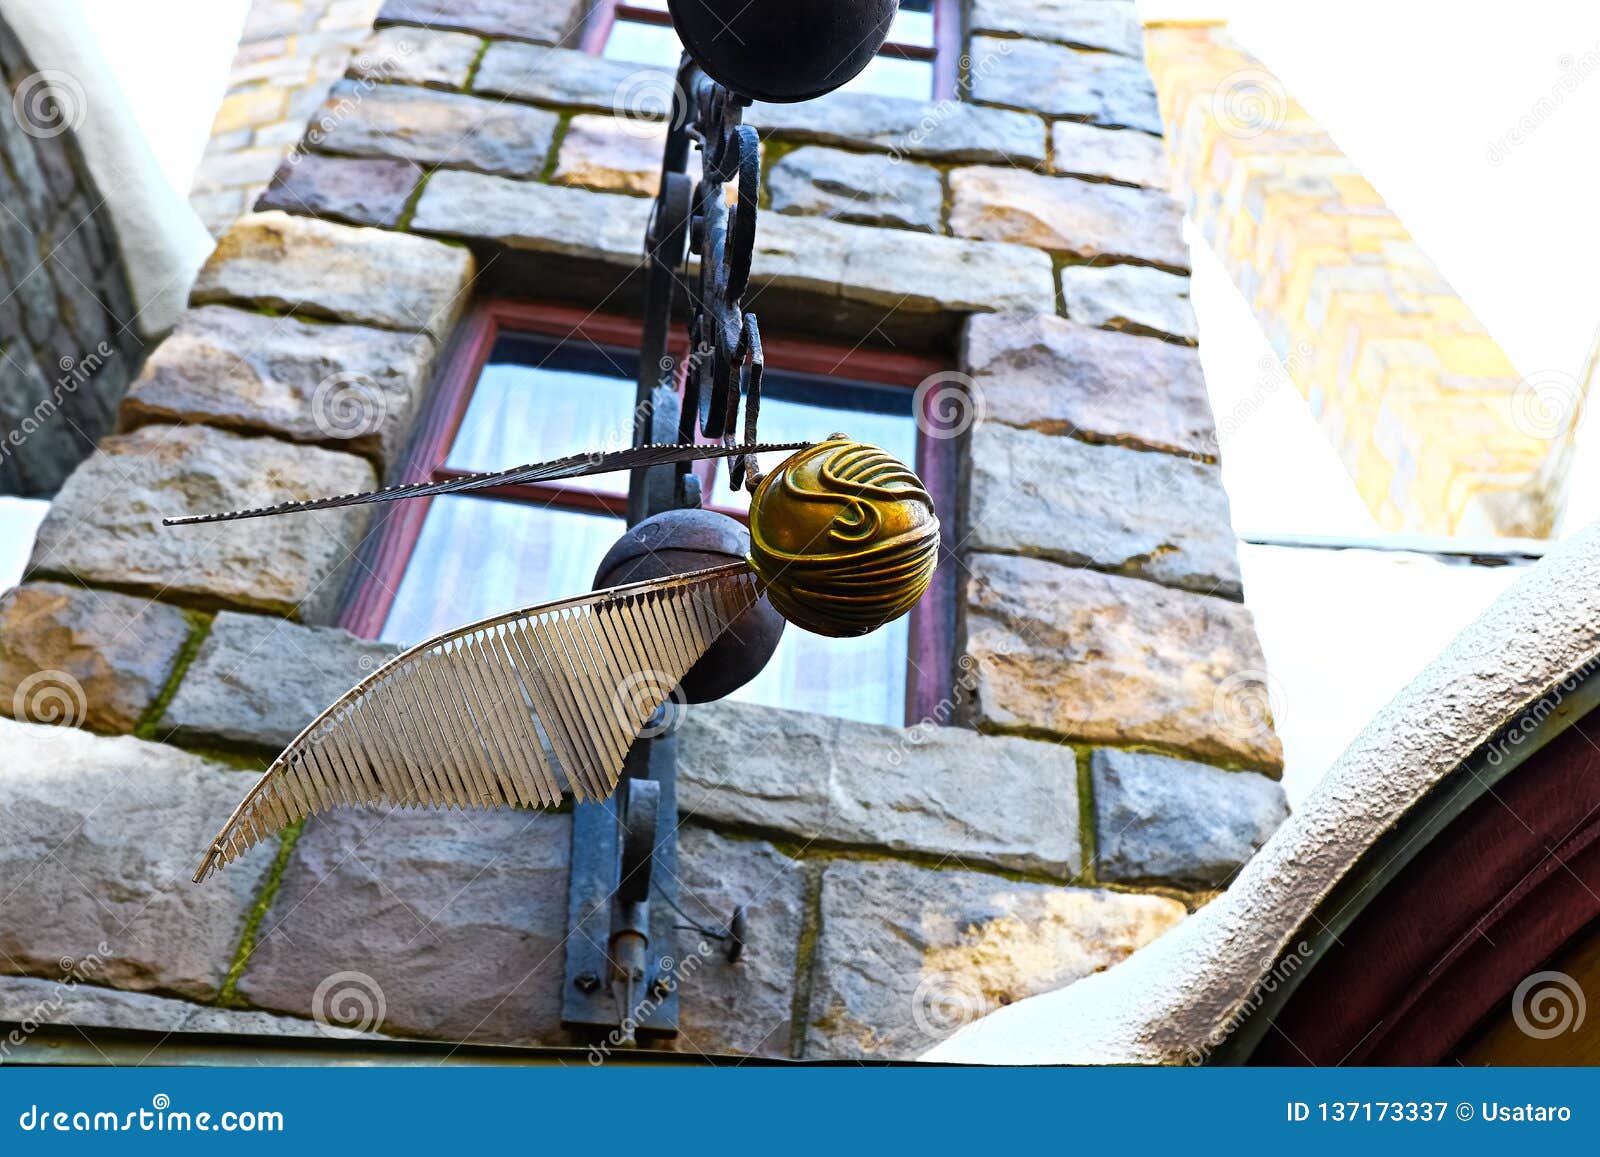 Download Display Of Quidditch Balls At The Wizarding World Of Harry ...